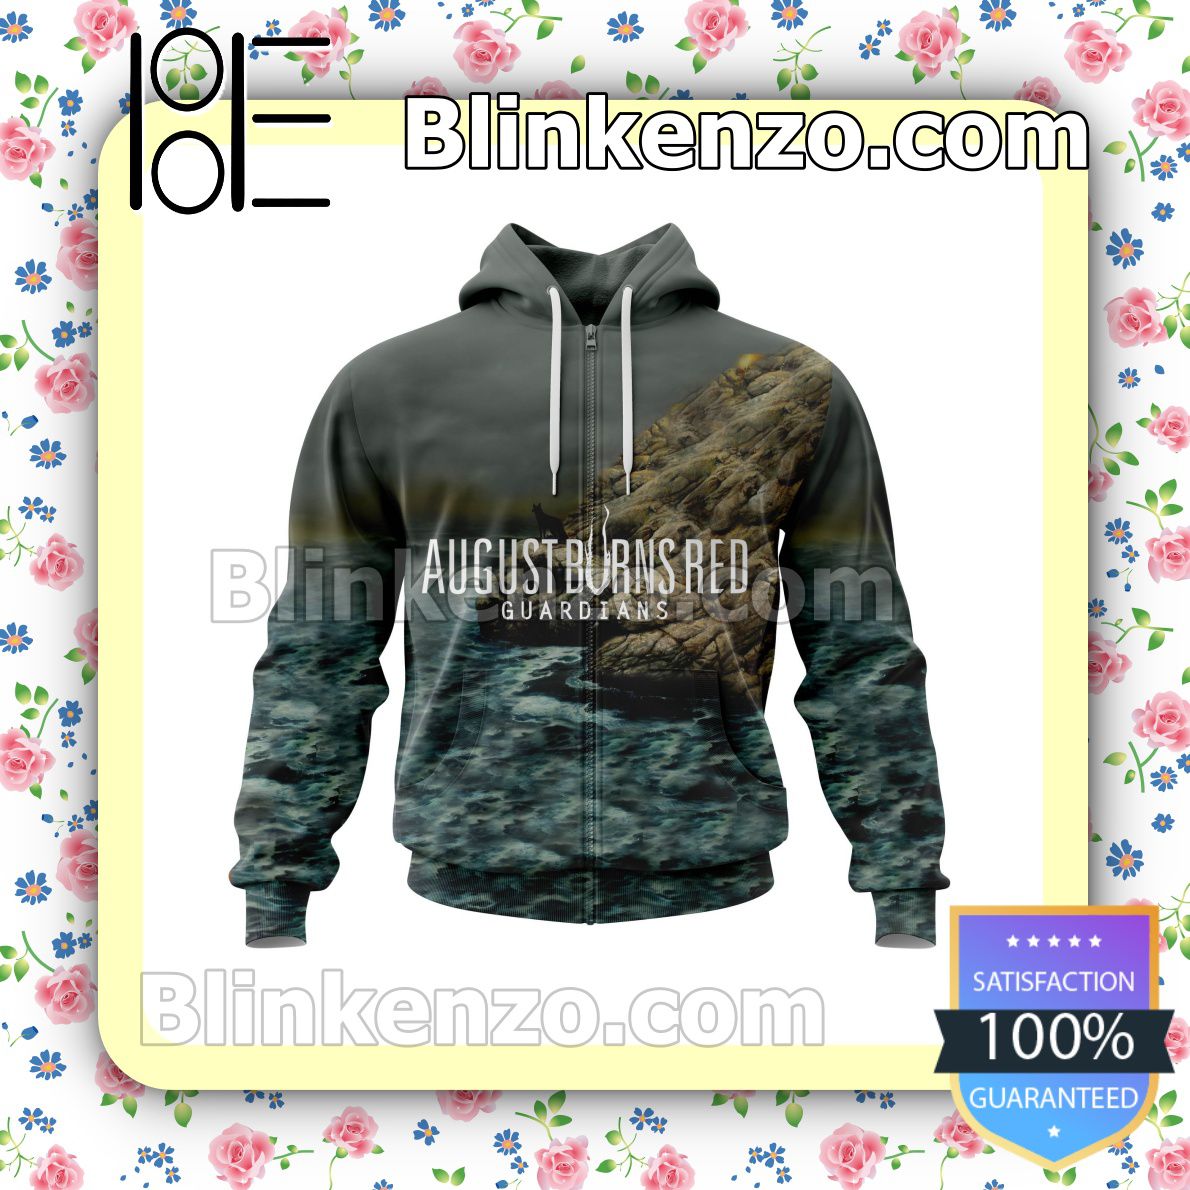 Personalized August Burns Red Guardians Album Cover Hooded Sweatshirt